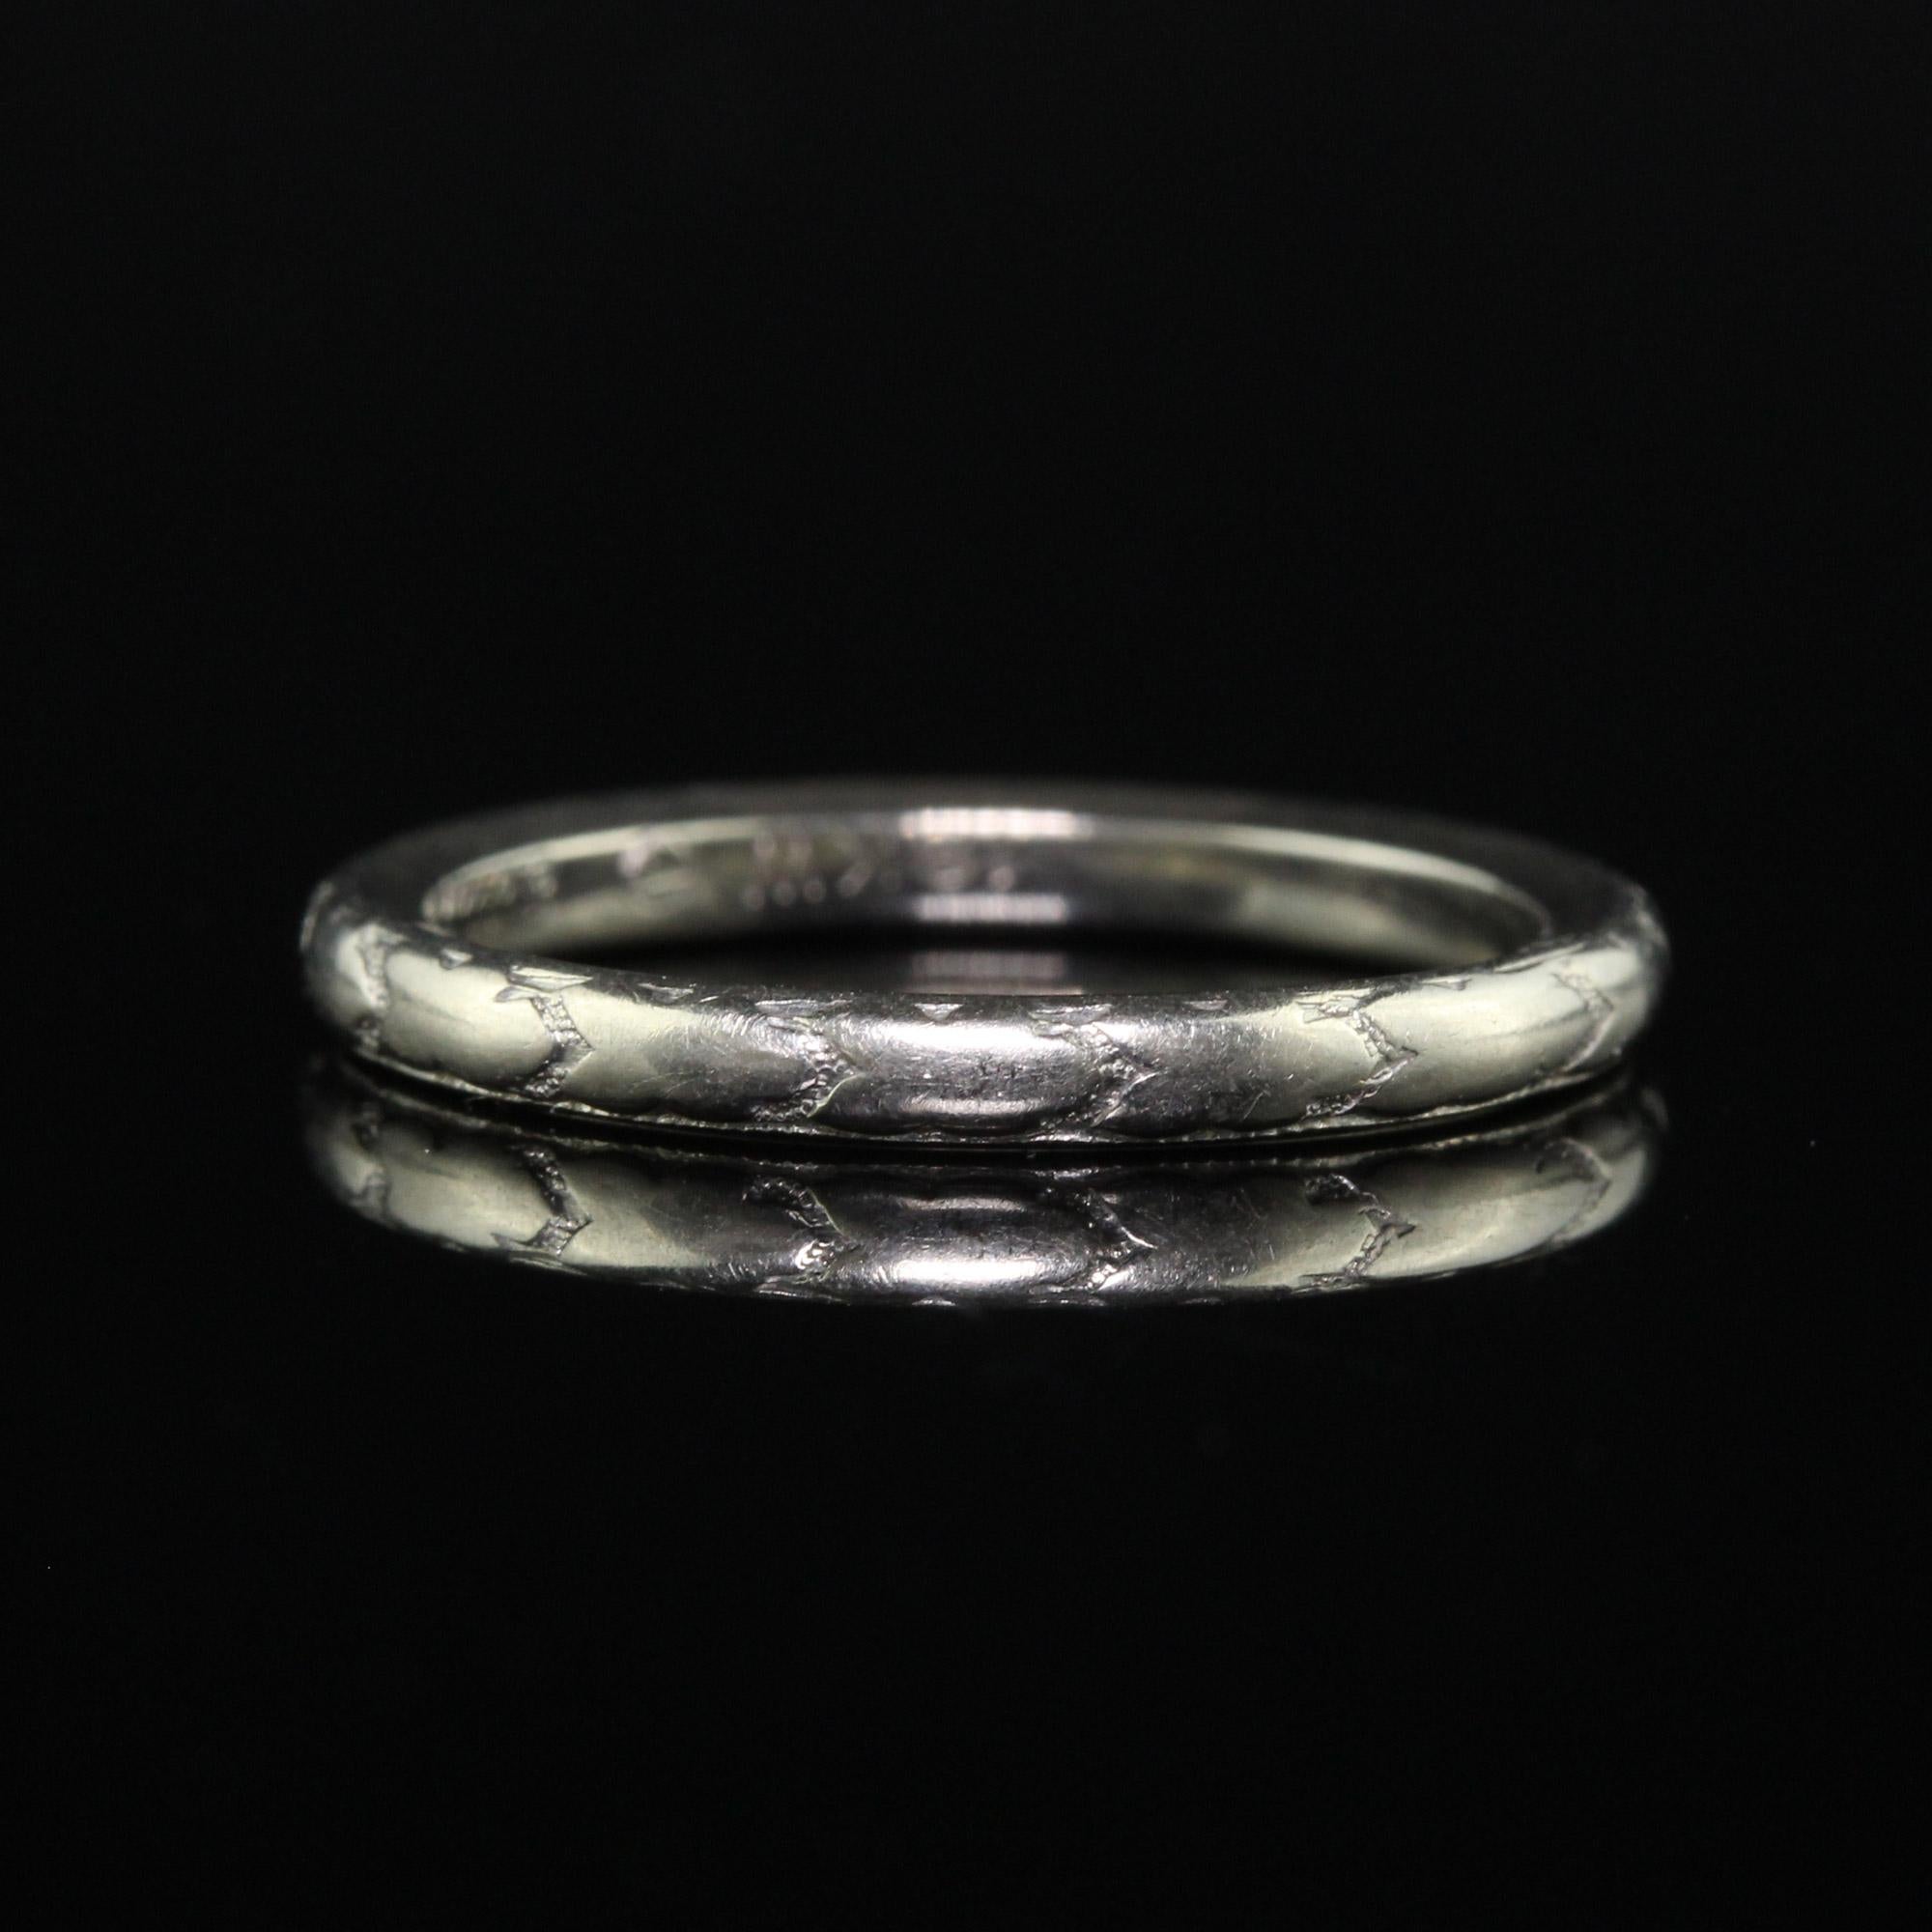 Antique Art Deco Orange Blossom 18K White Gold Engraved Wedding Band - Size 4 1/ In Good Condition For Sale In Great Neck, NY